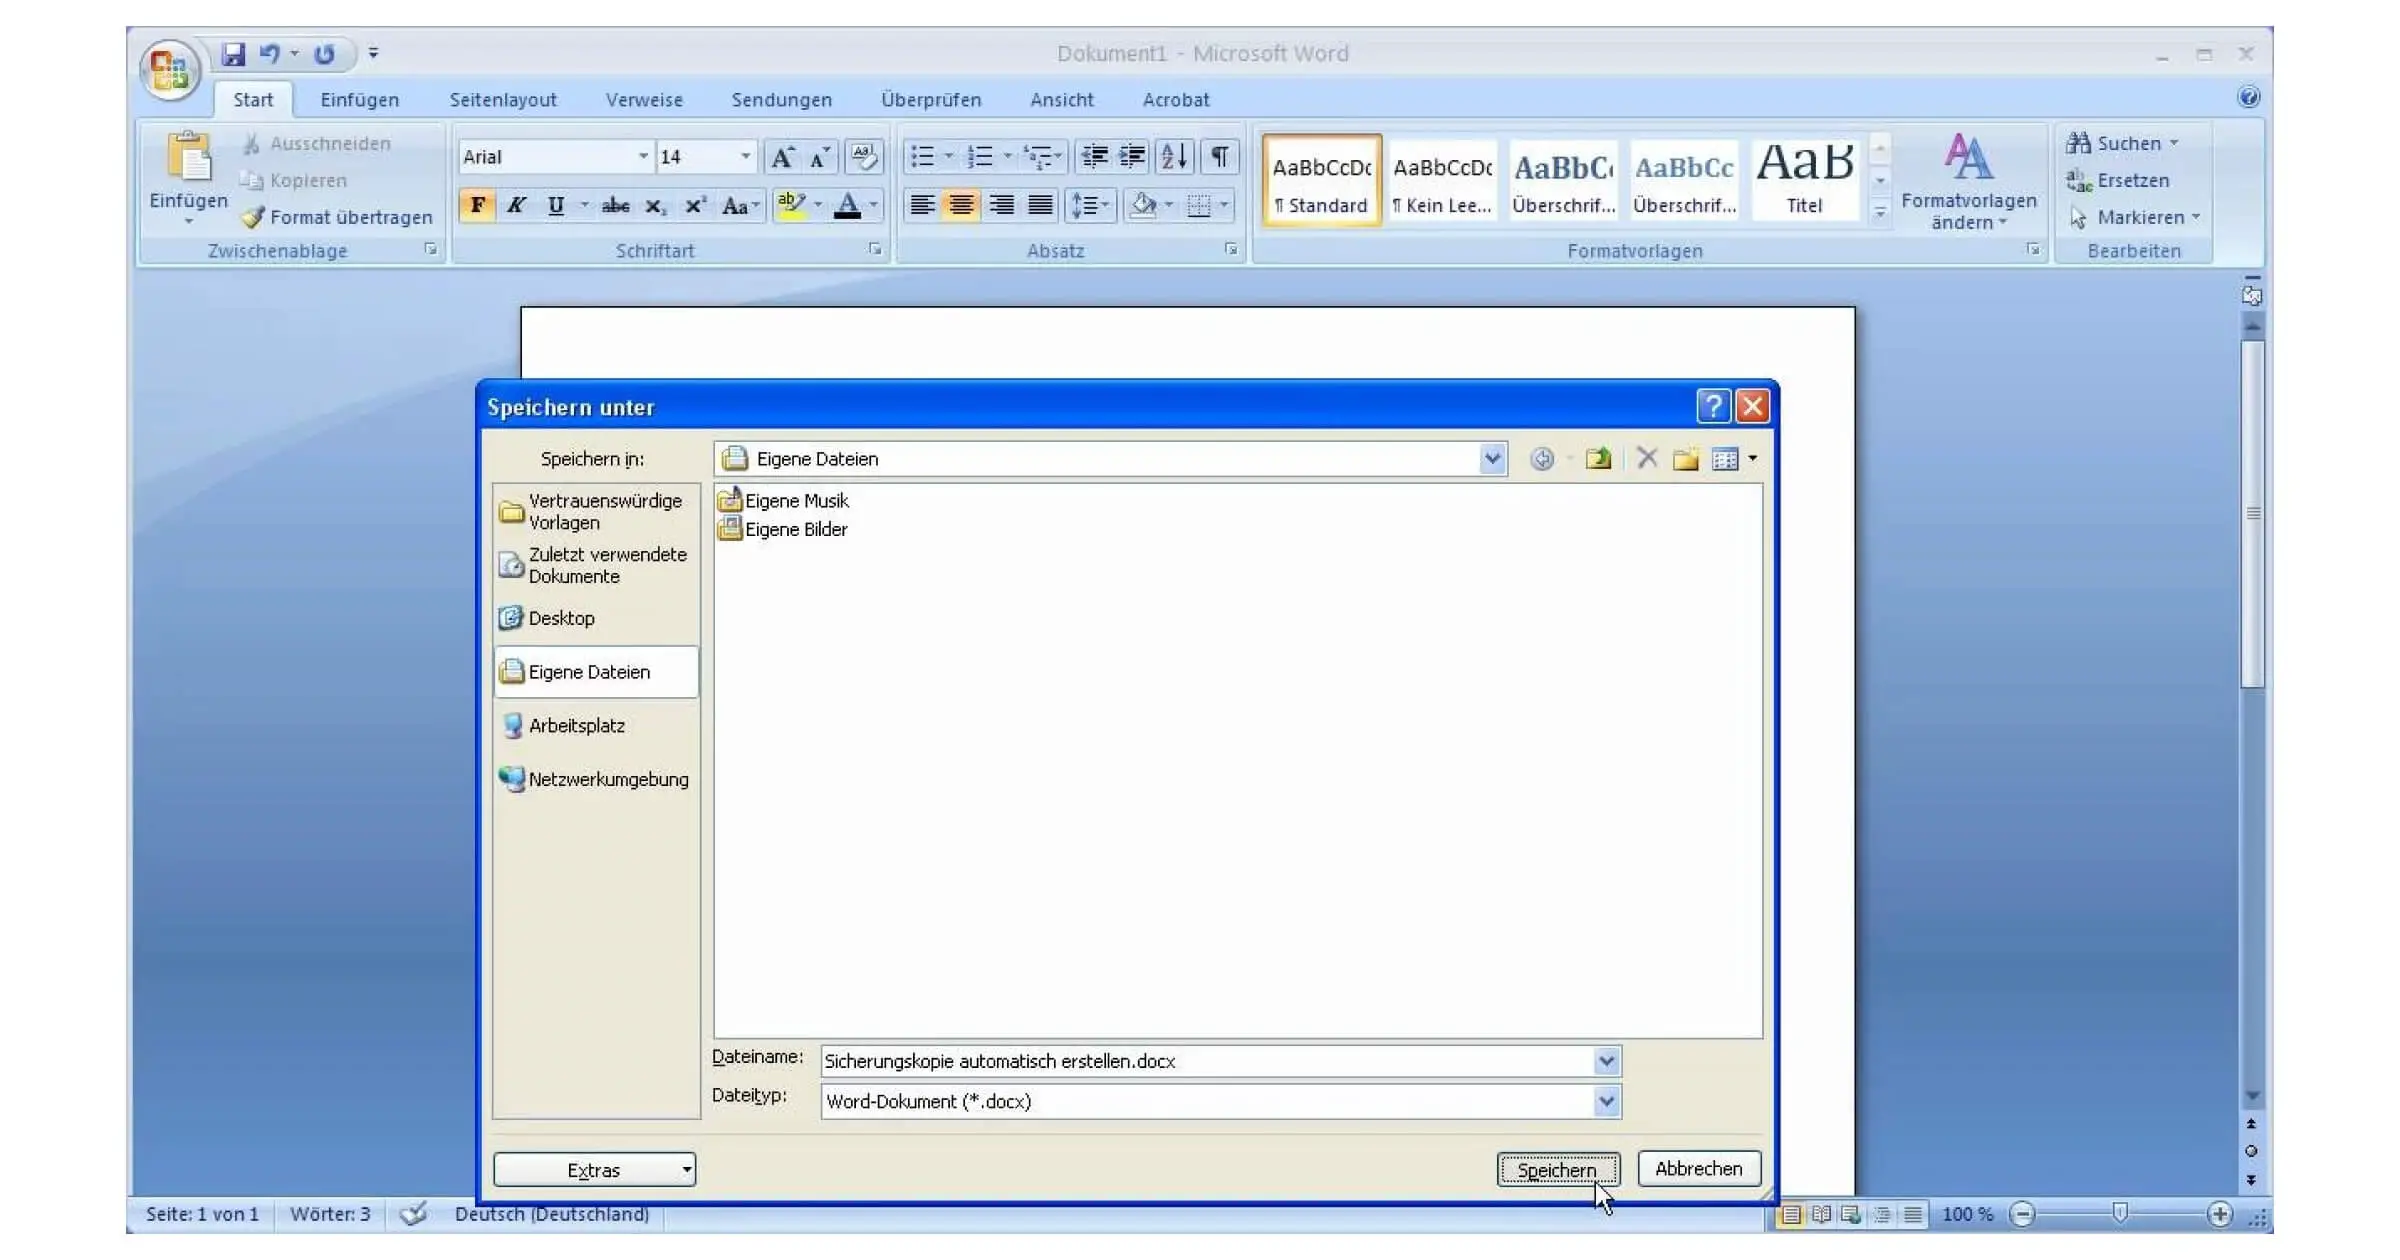 Already in Microsoft Word 2007 you could open a DOCX file